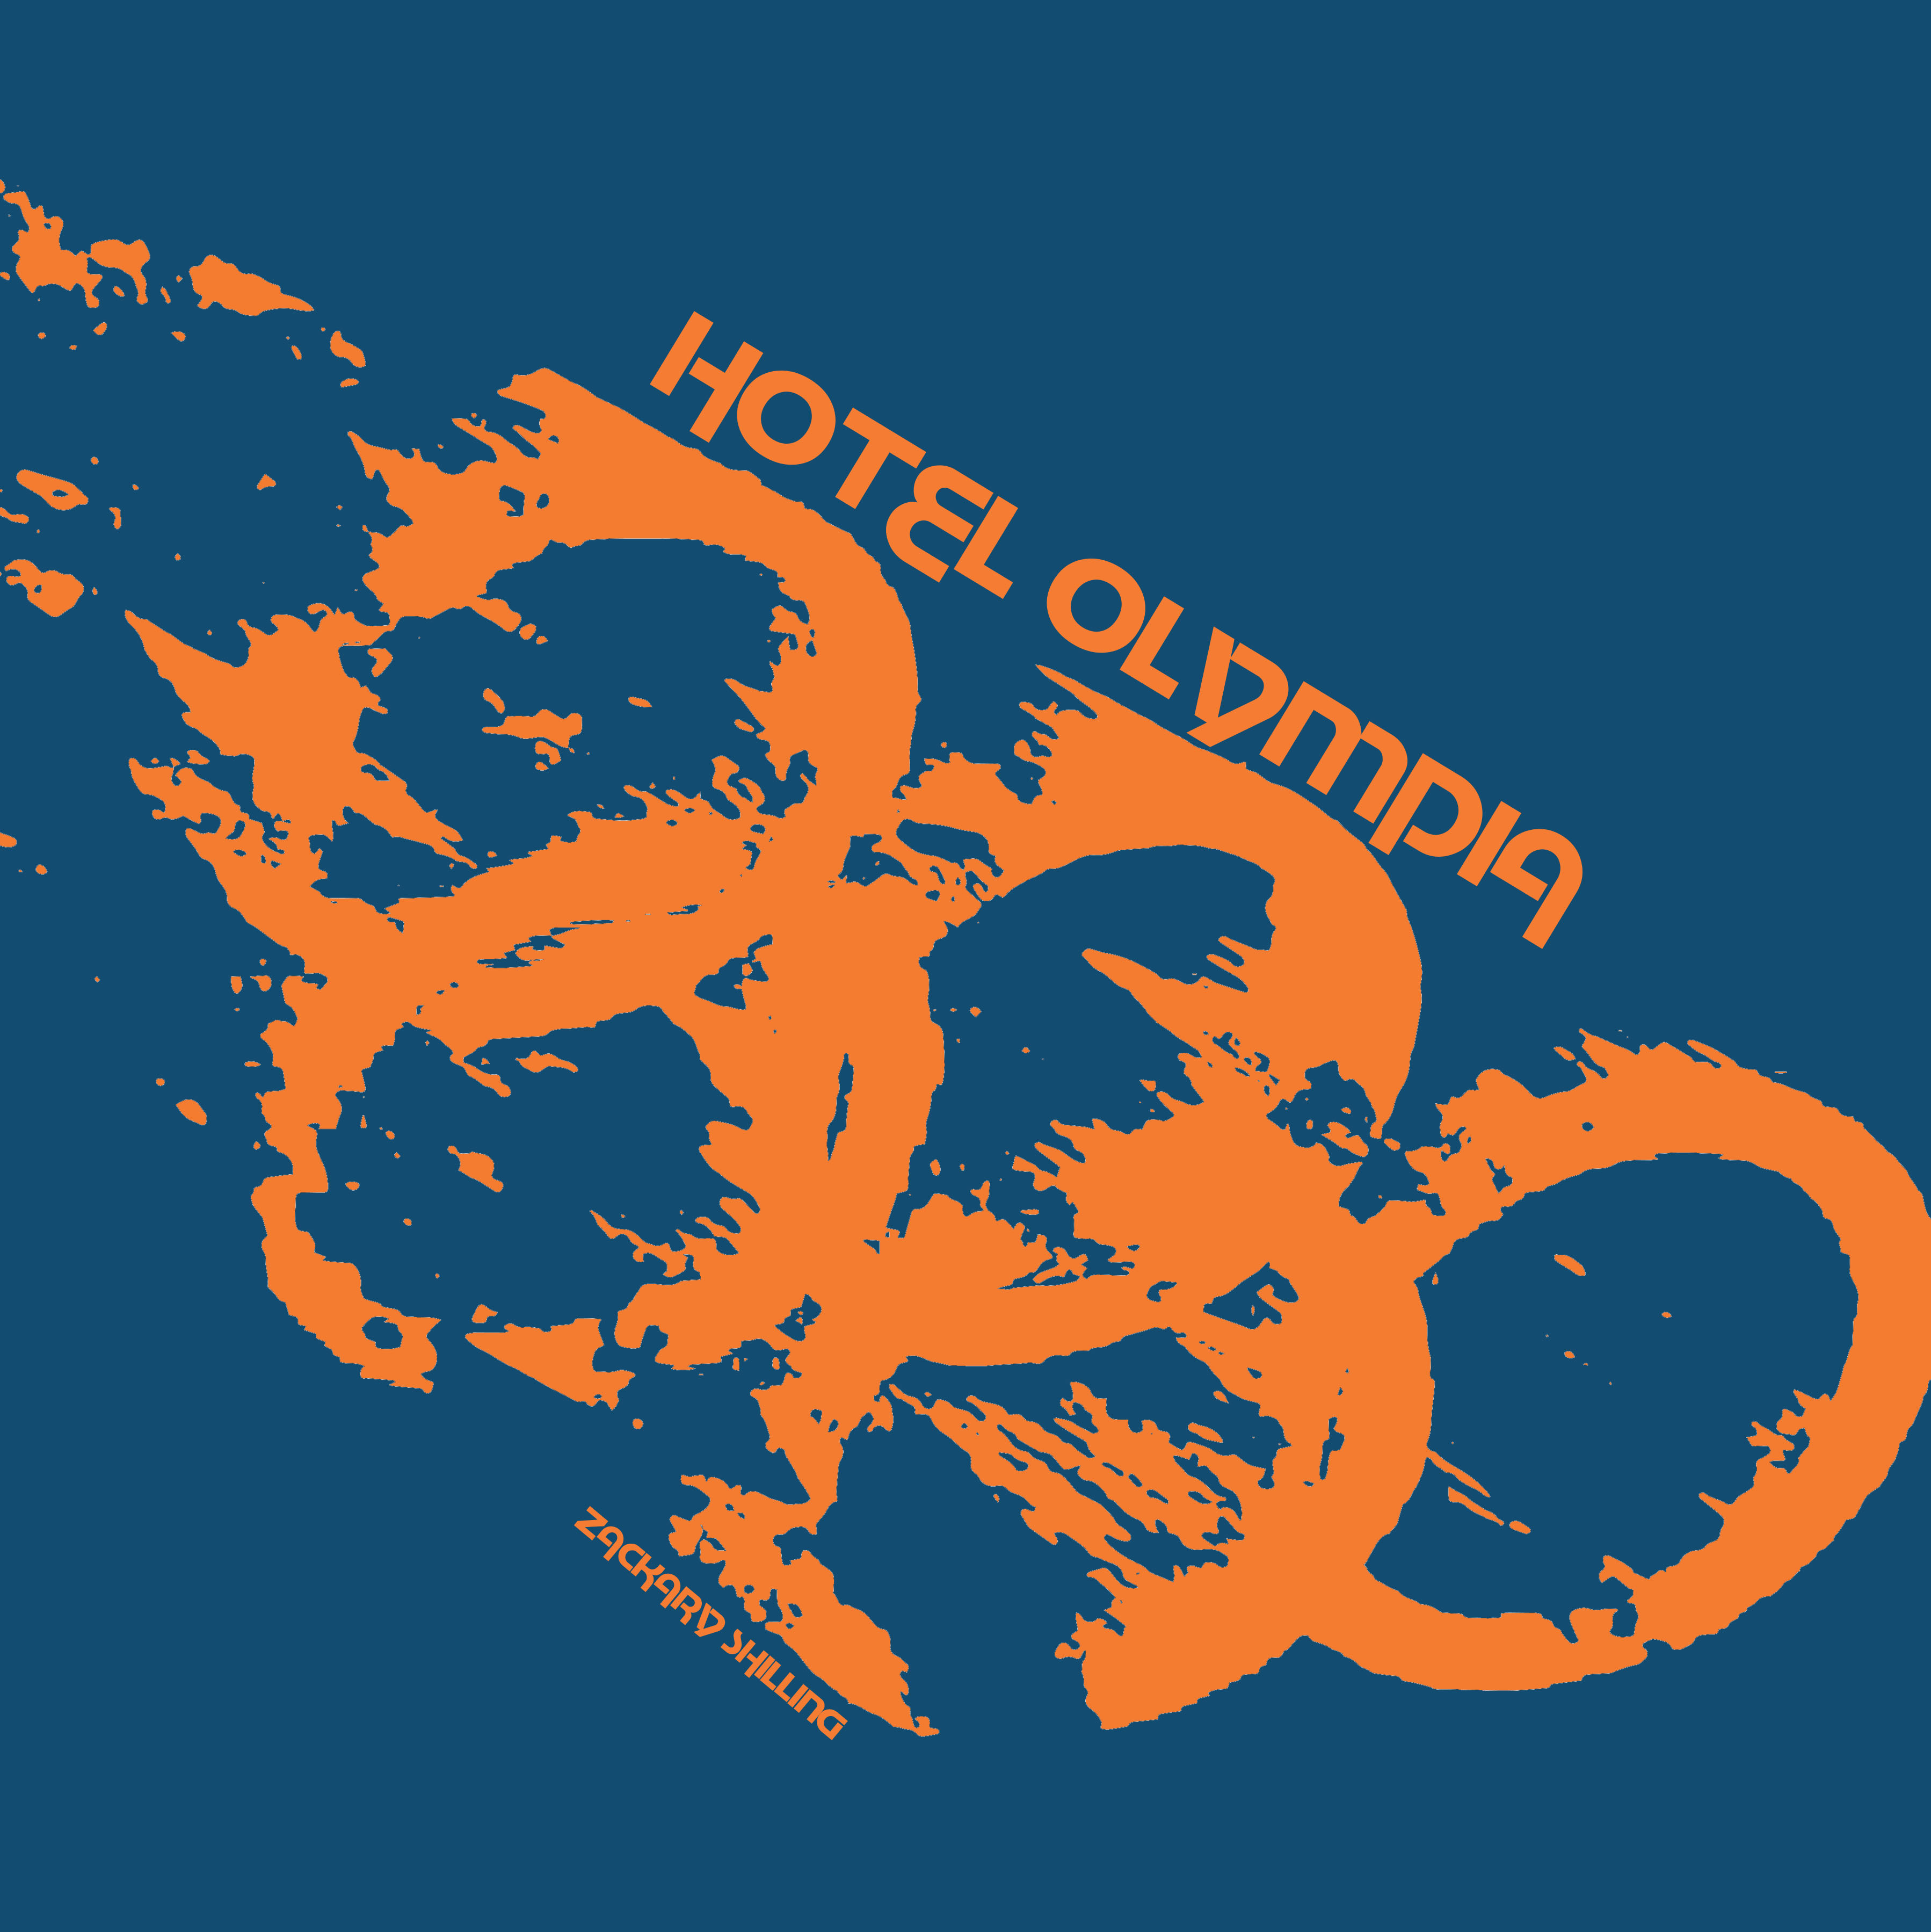 Hotel Olympia: Uncovering the Past, Building for the Future: the Architectural Story of Olympic Hotel Igman's Rehabilitation and Commemorative Museum   (click for a larger preview)